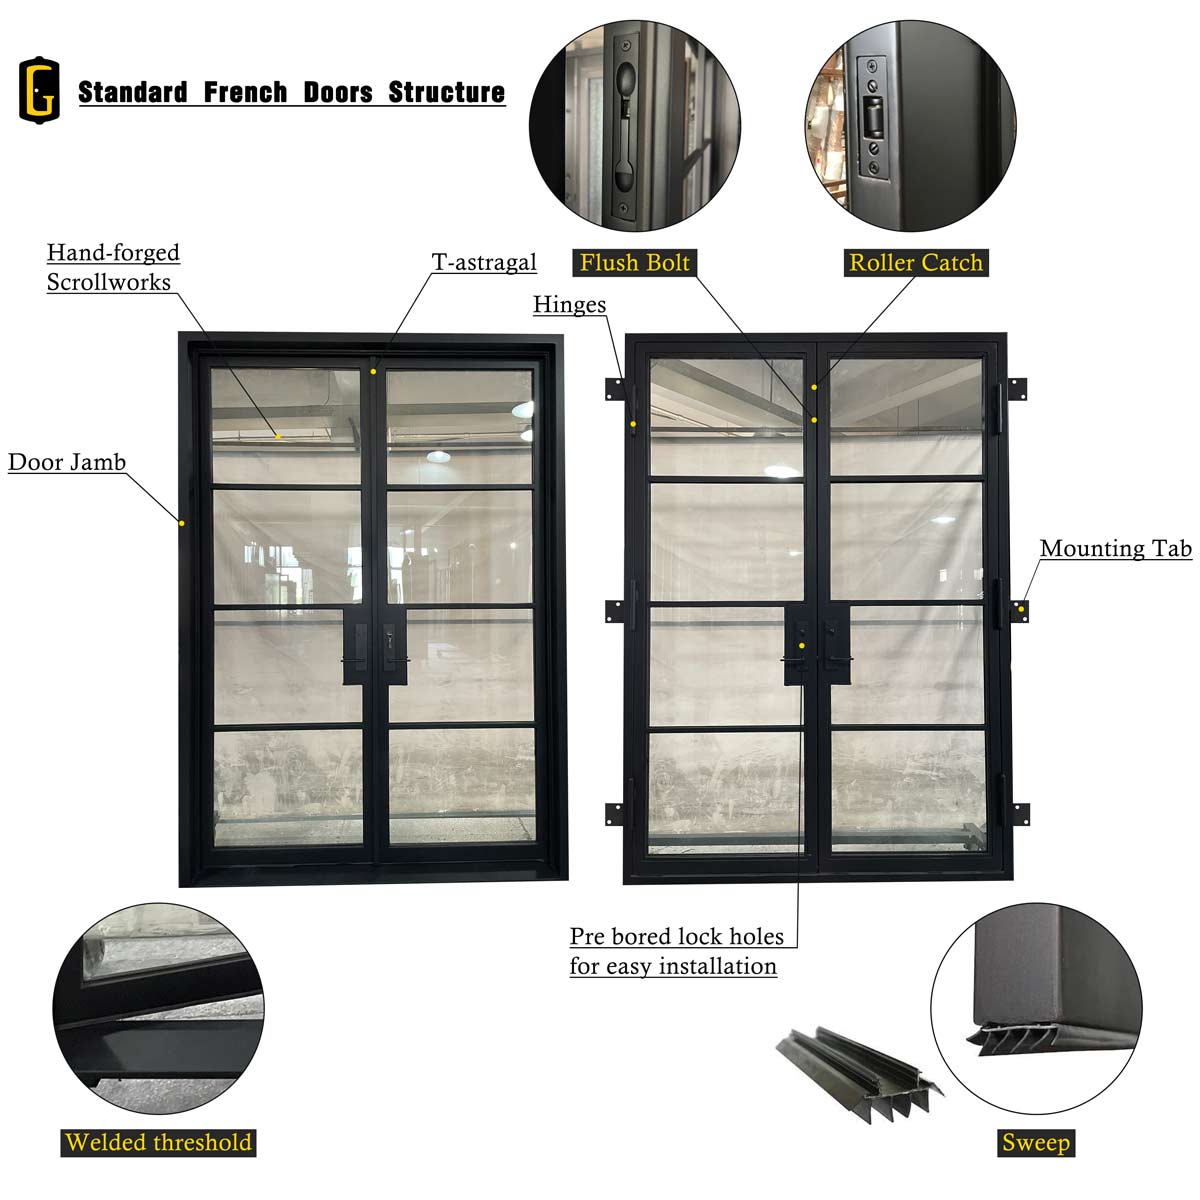 GID Thermal Break Clean Design Iron French Double Door with Square Transom TFD237